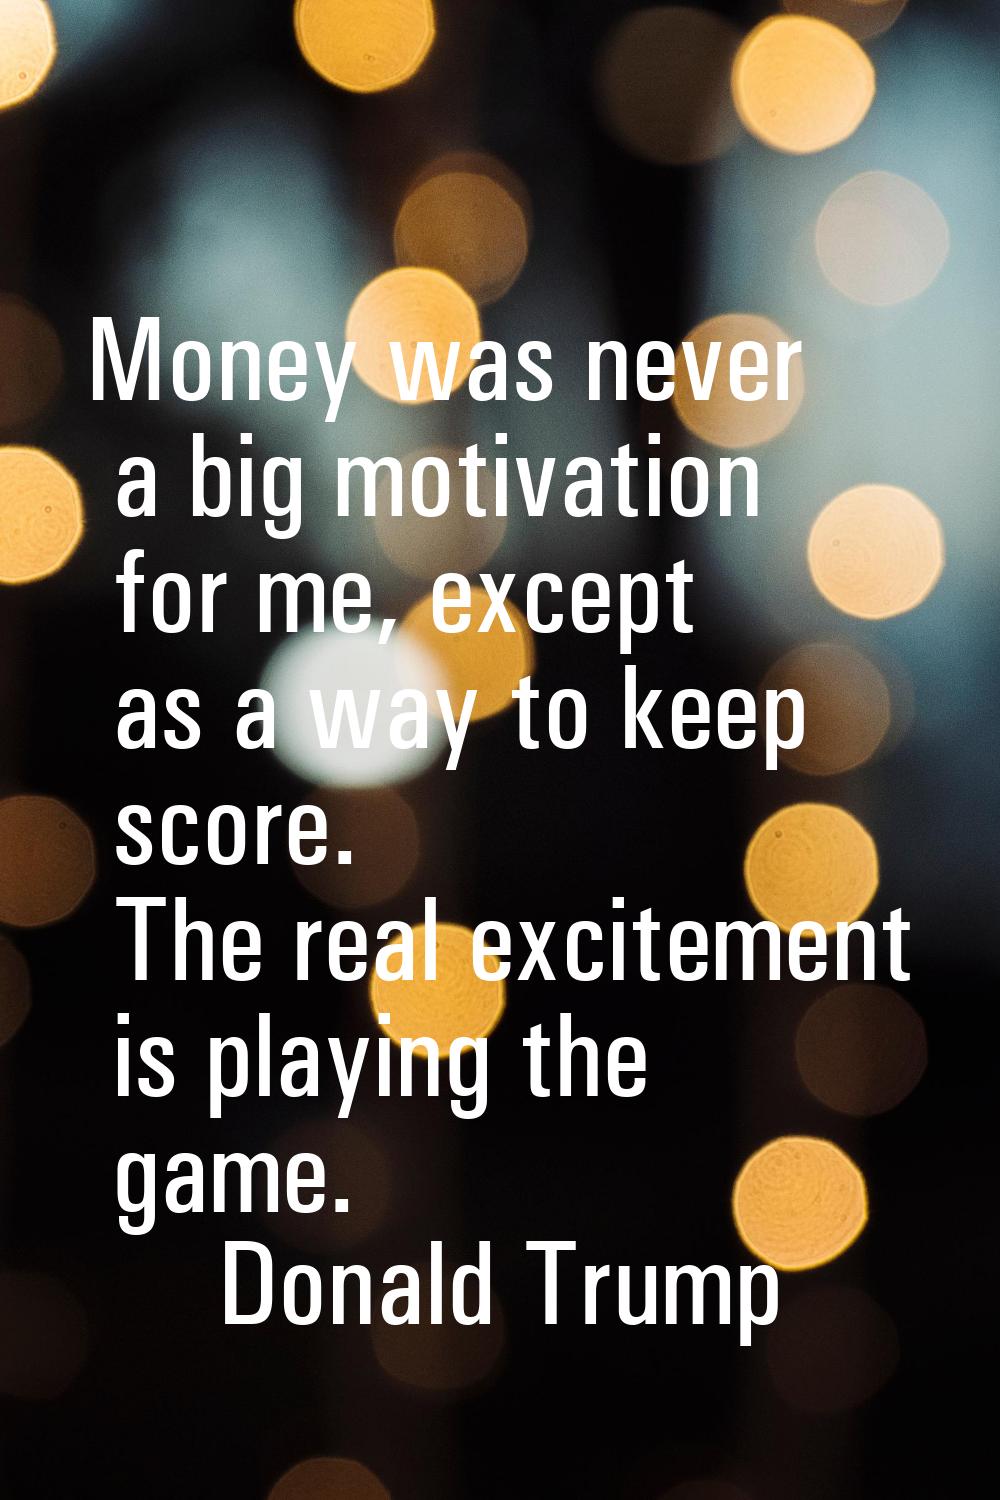 Money was never a big motivation for me, except as a way to keep score. The real excitement is play